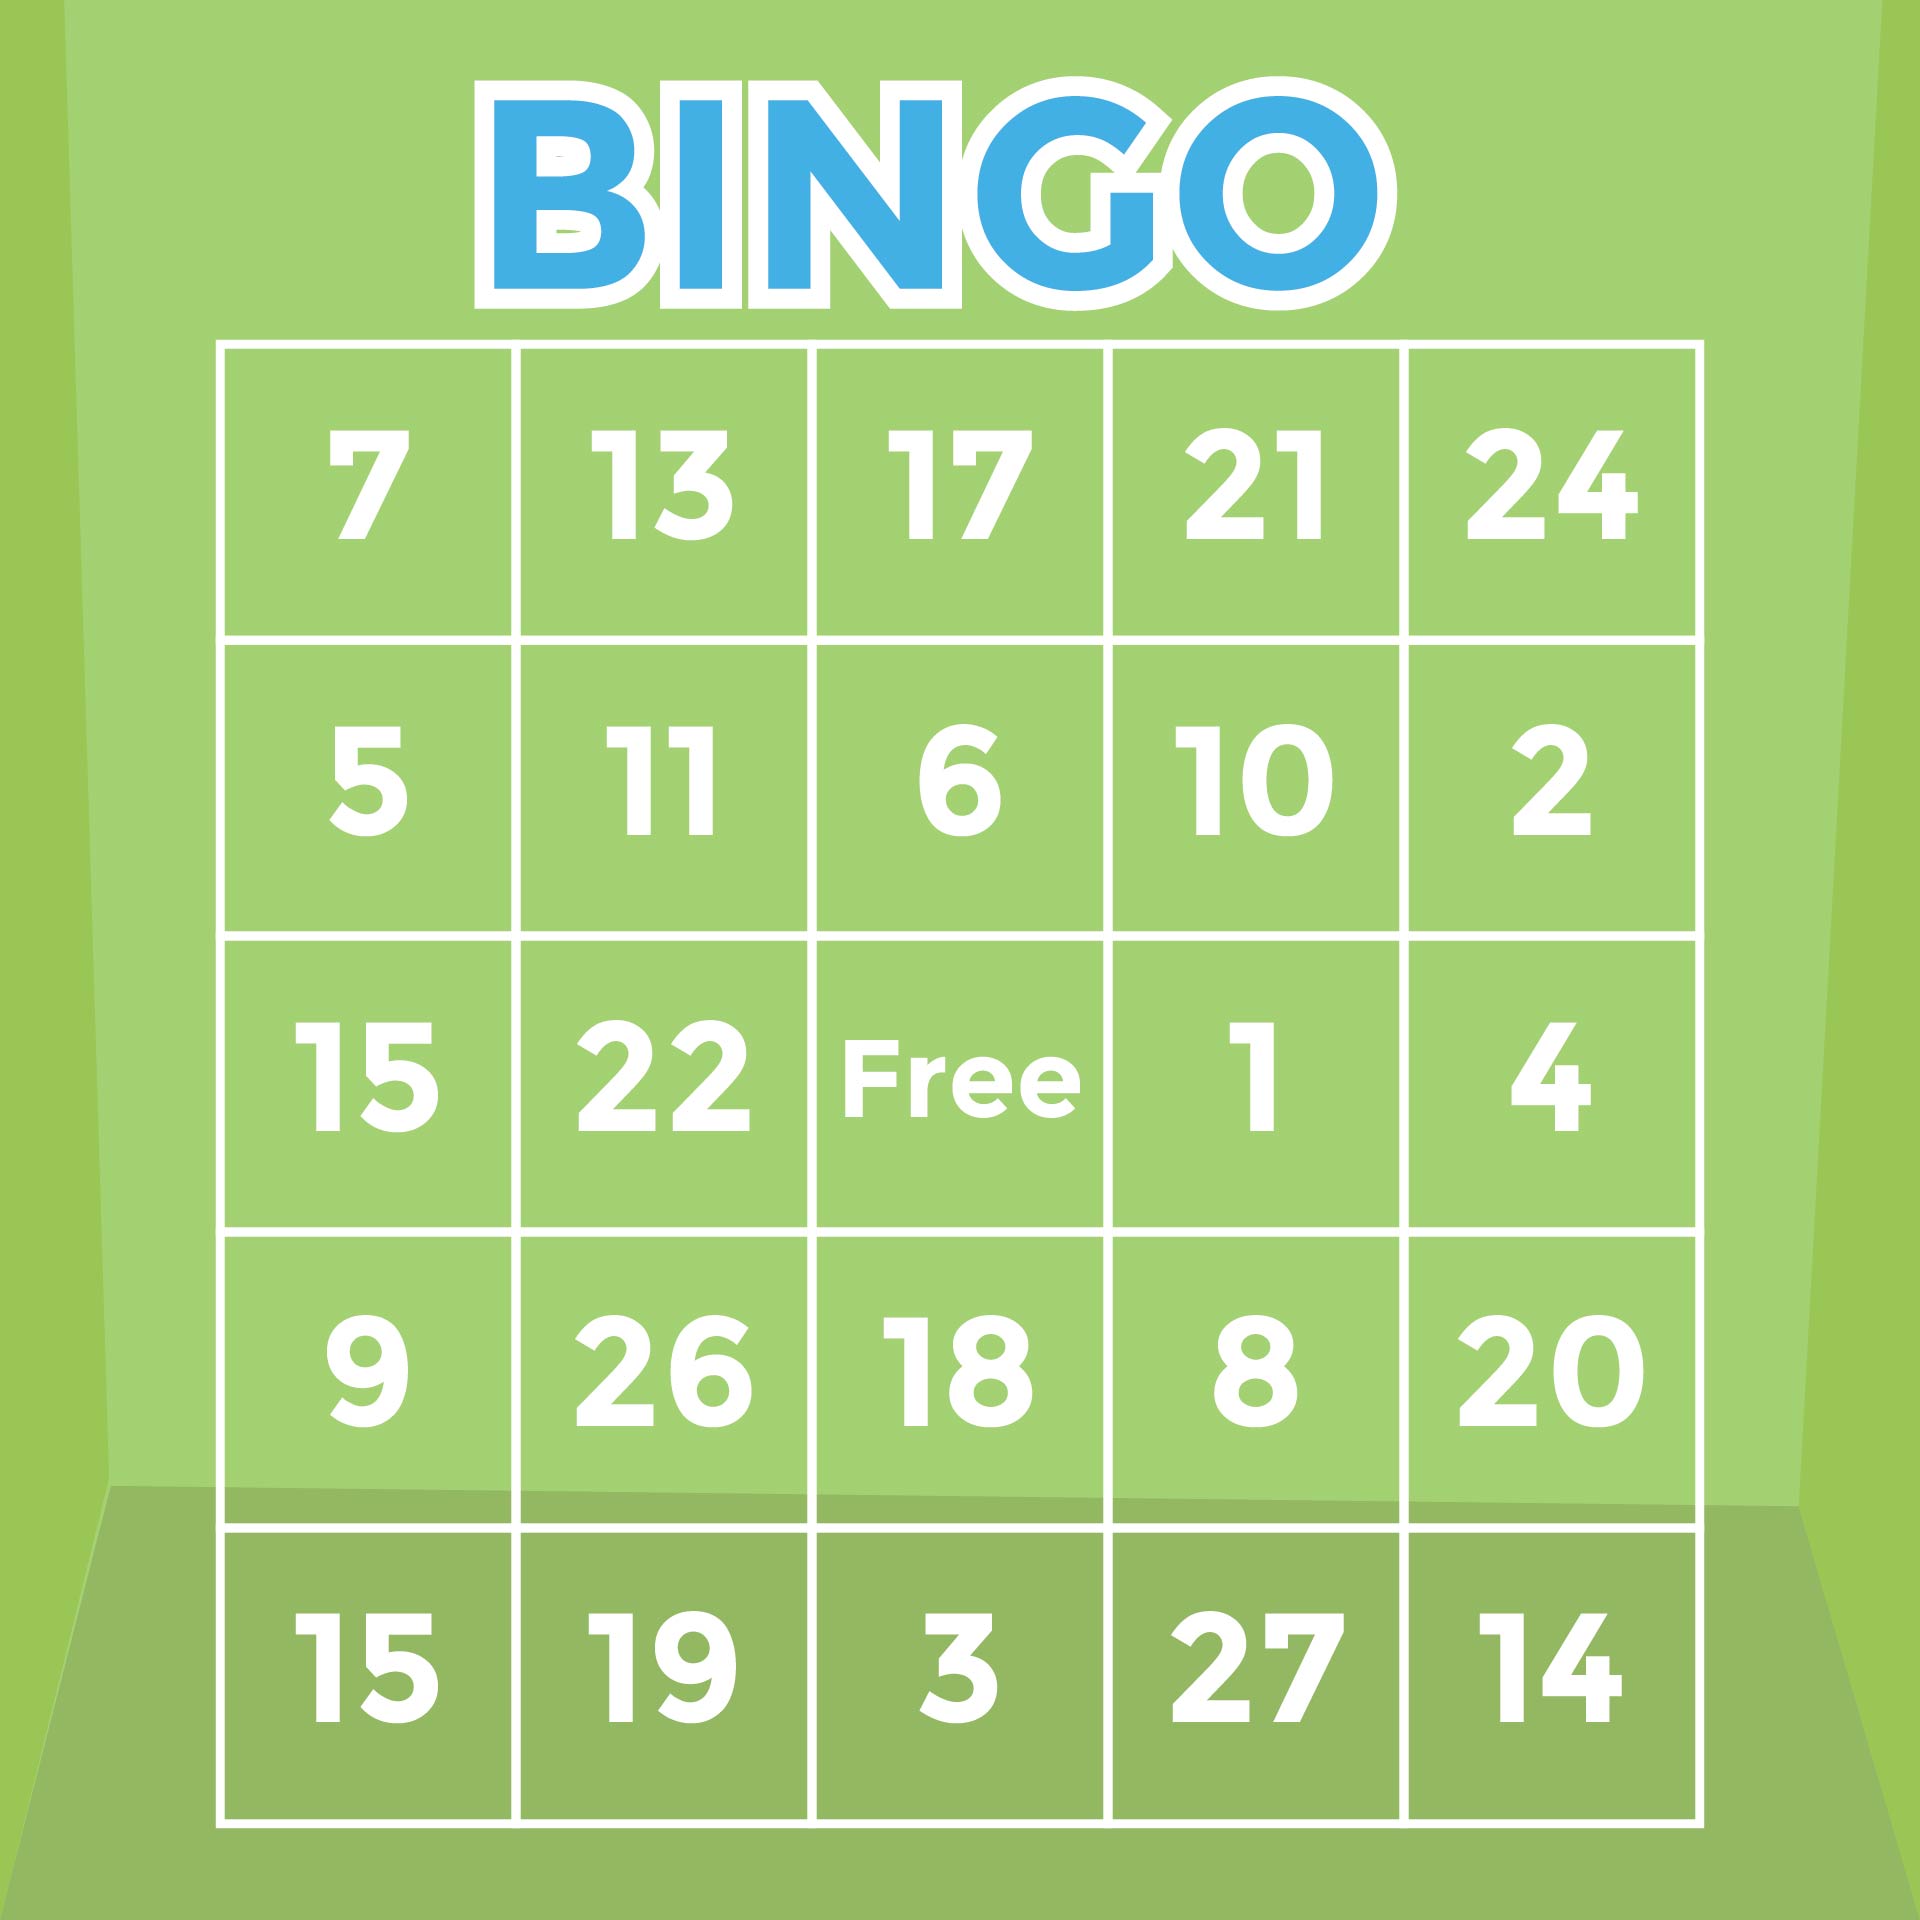 how-to-create-a-bingo-board-using-excel-make-bingo-game-in-excel